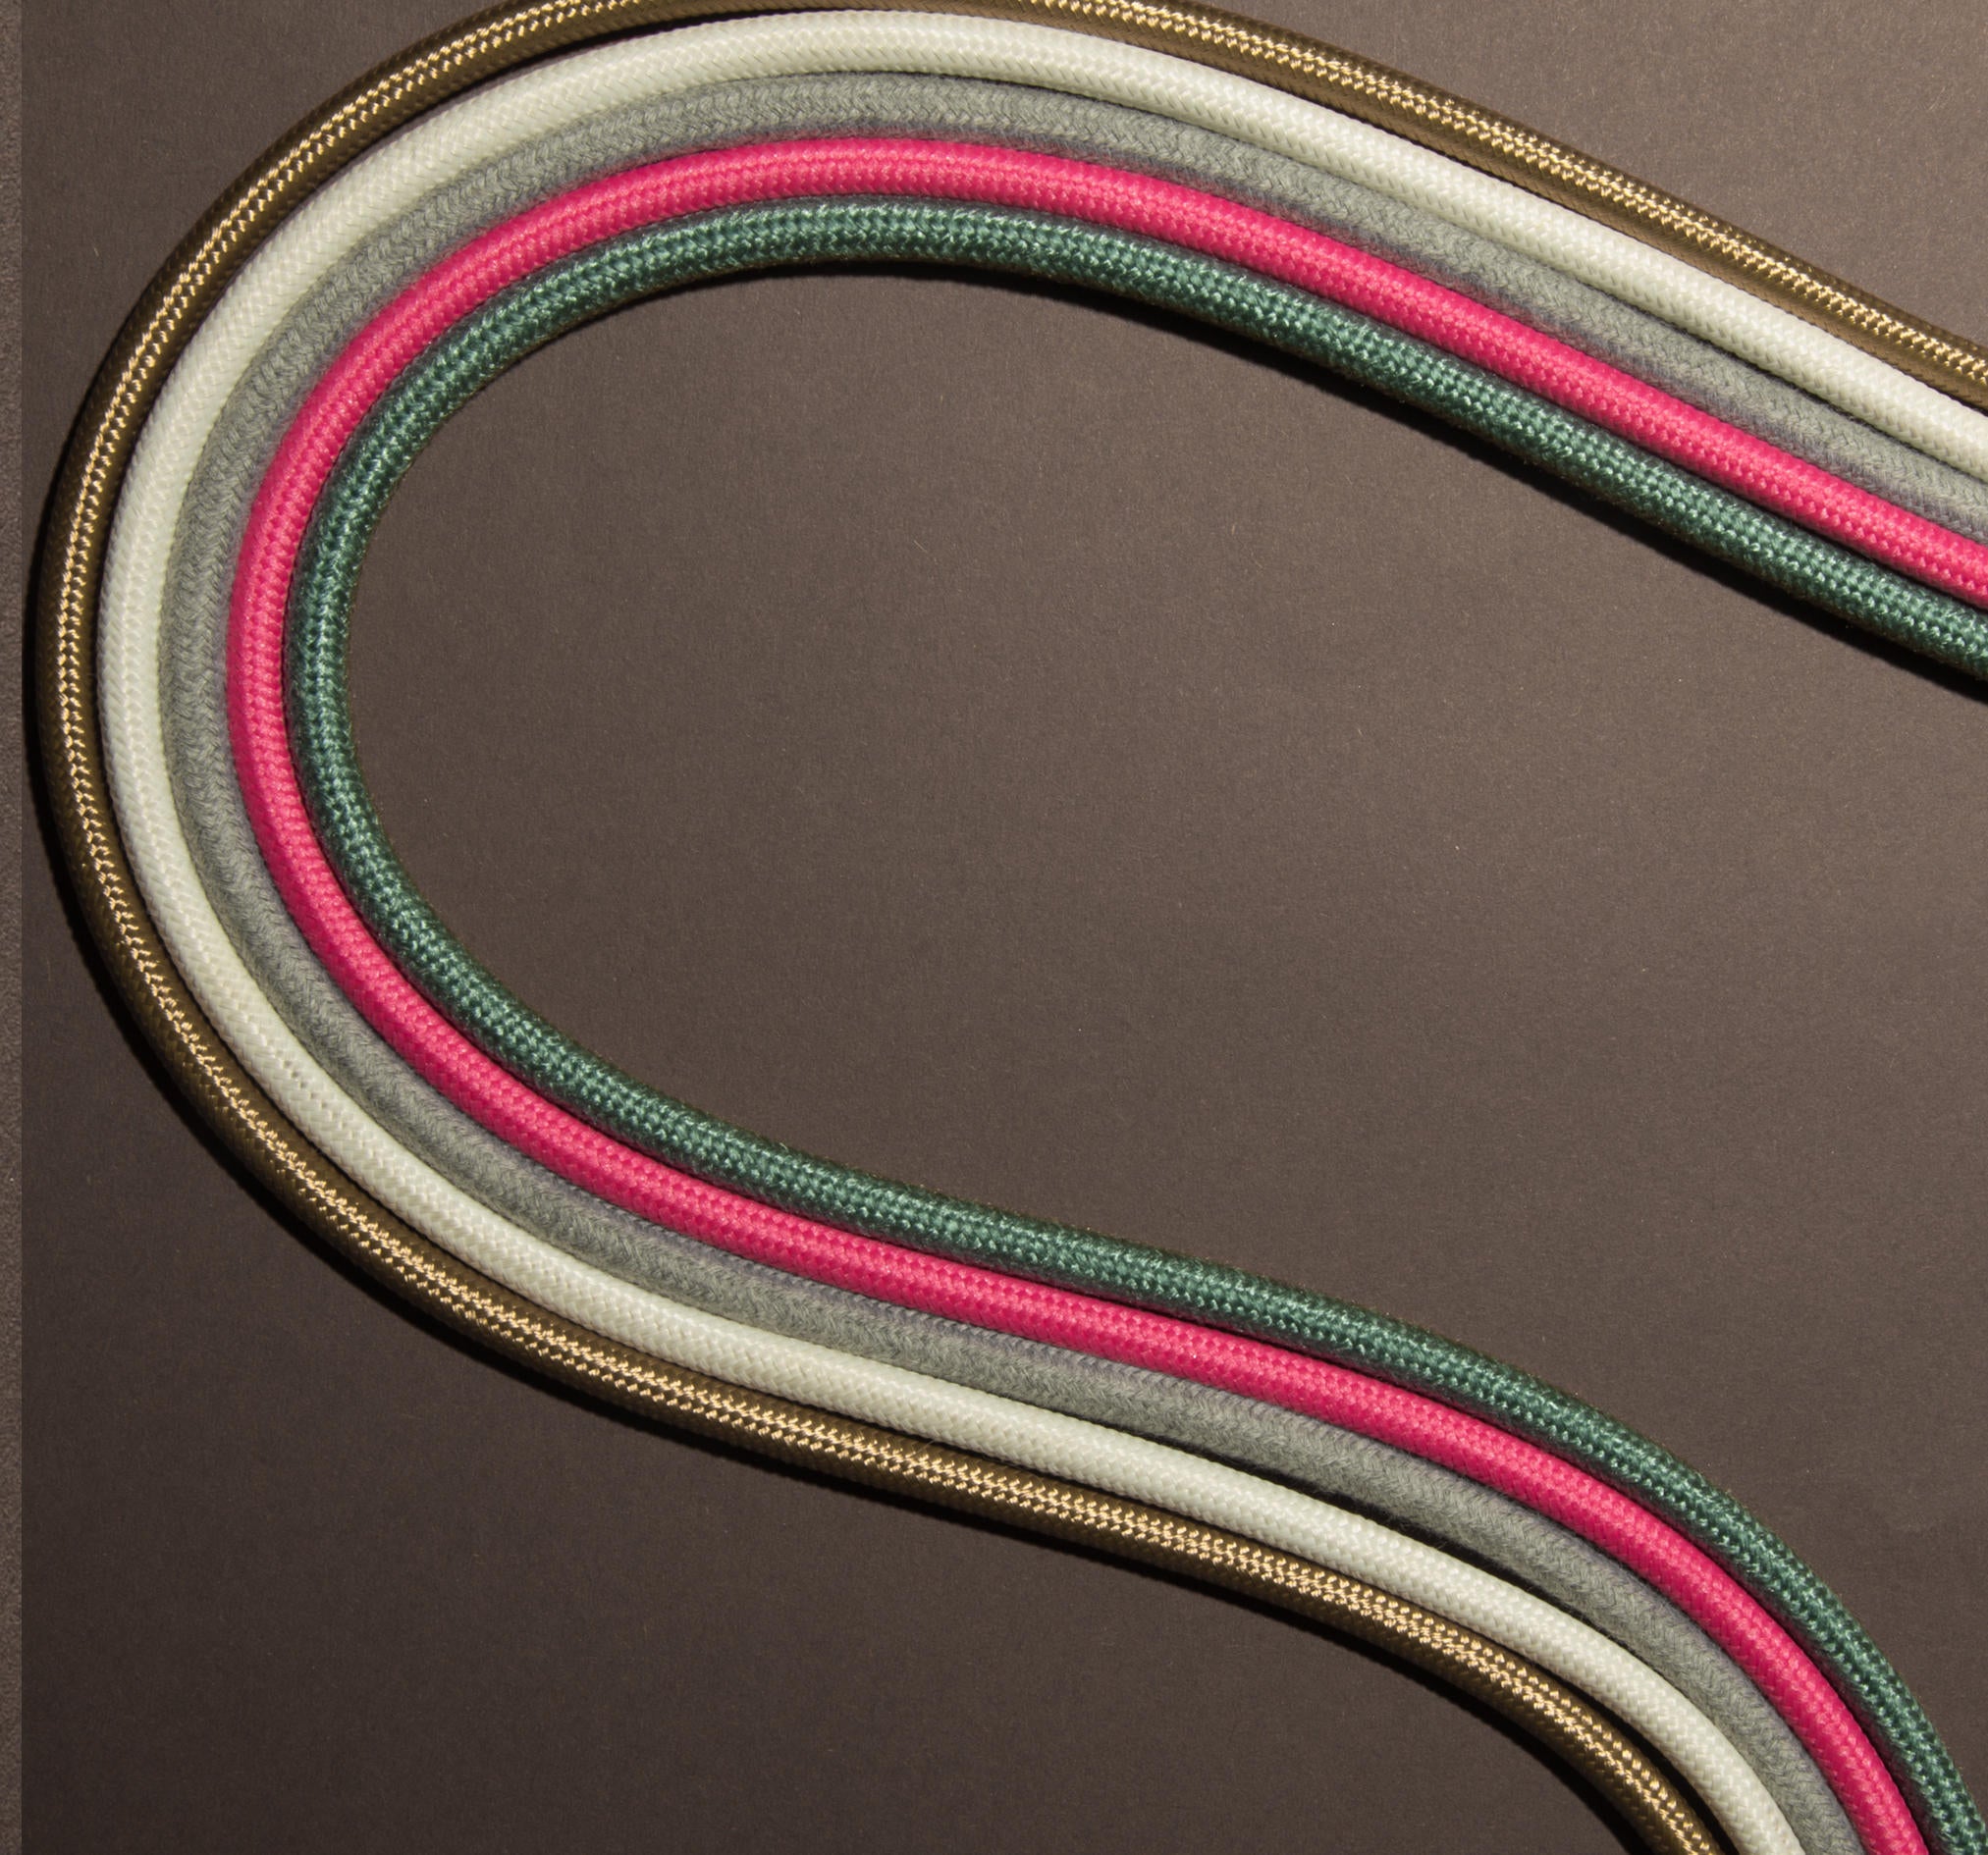 How To Style Fabric Lighting Cable Part Three: The Figure of Eight